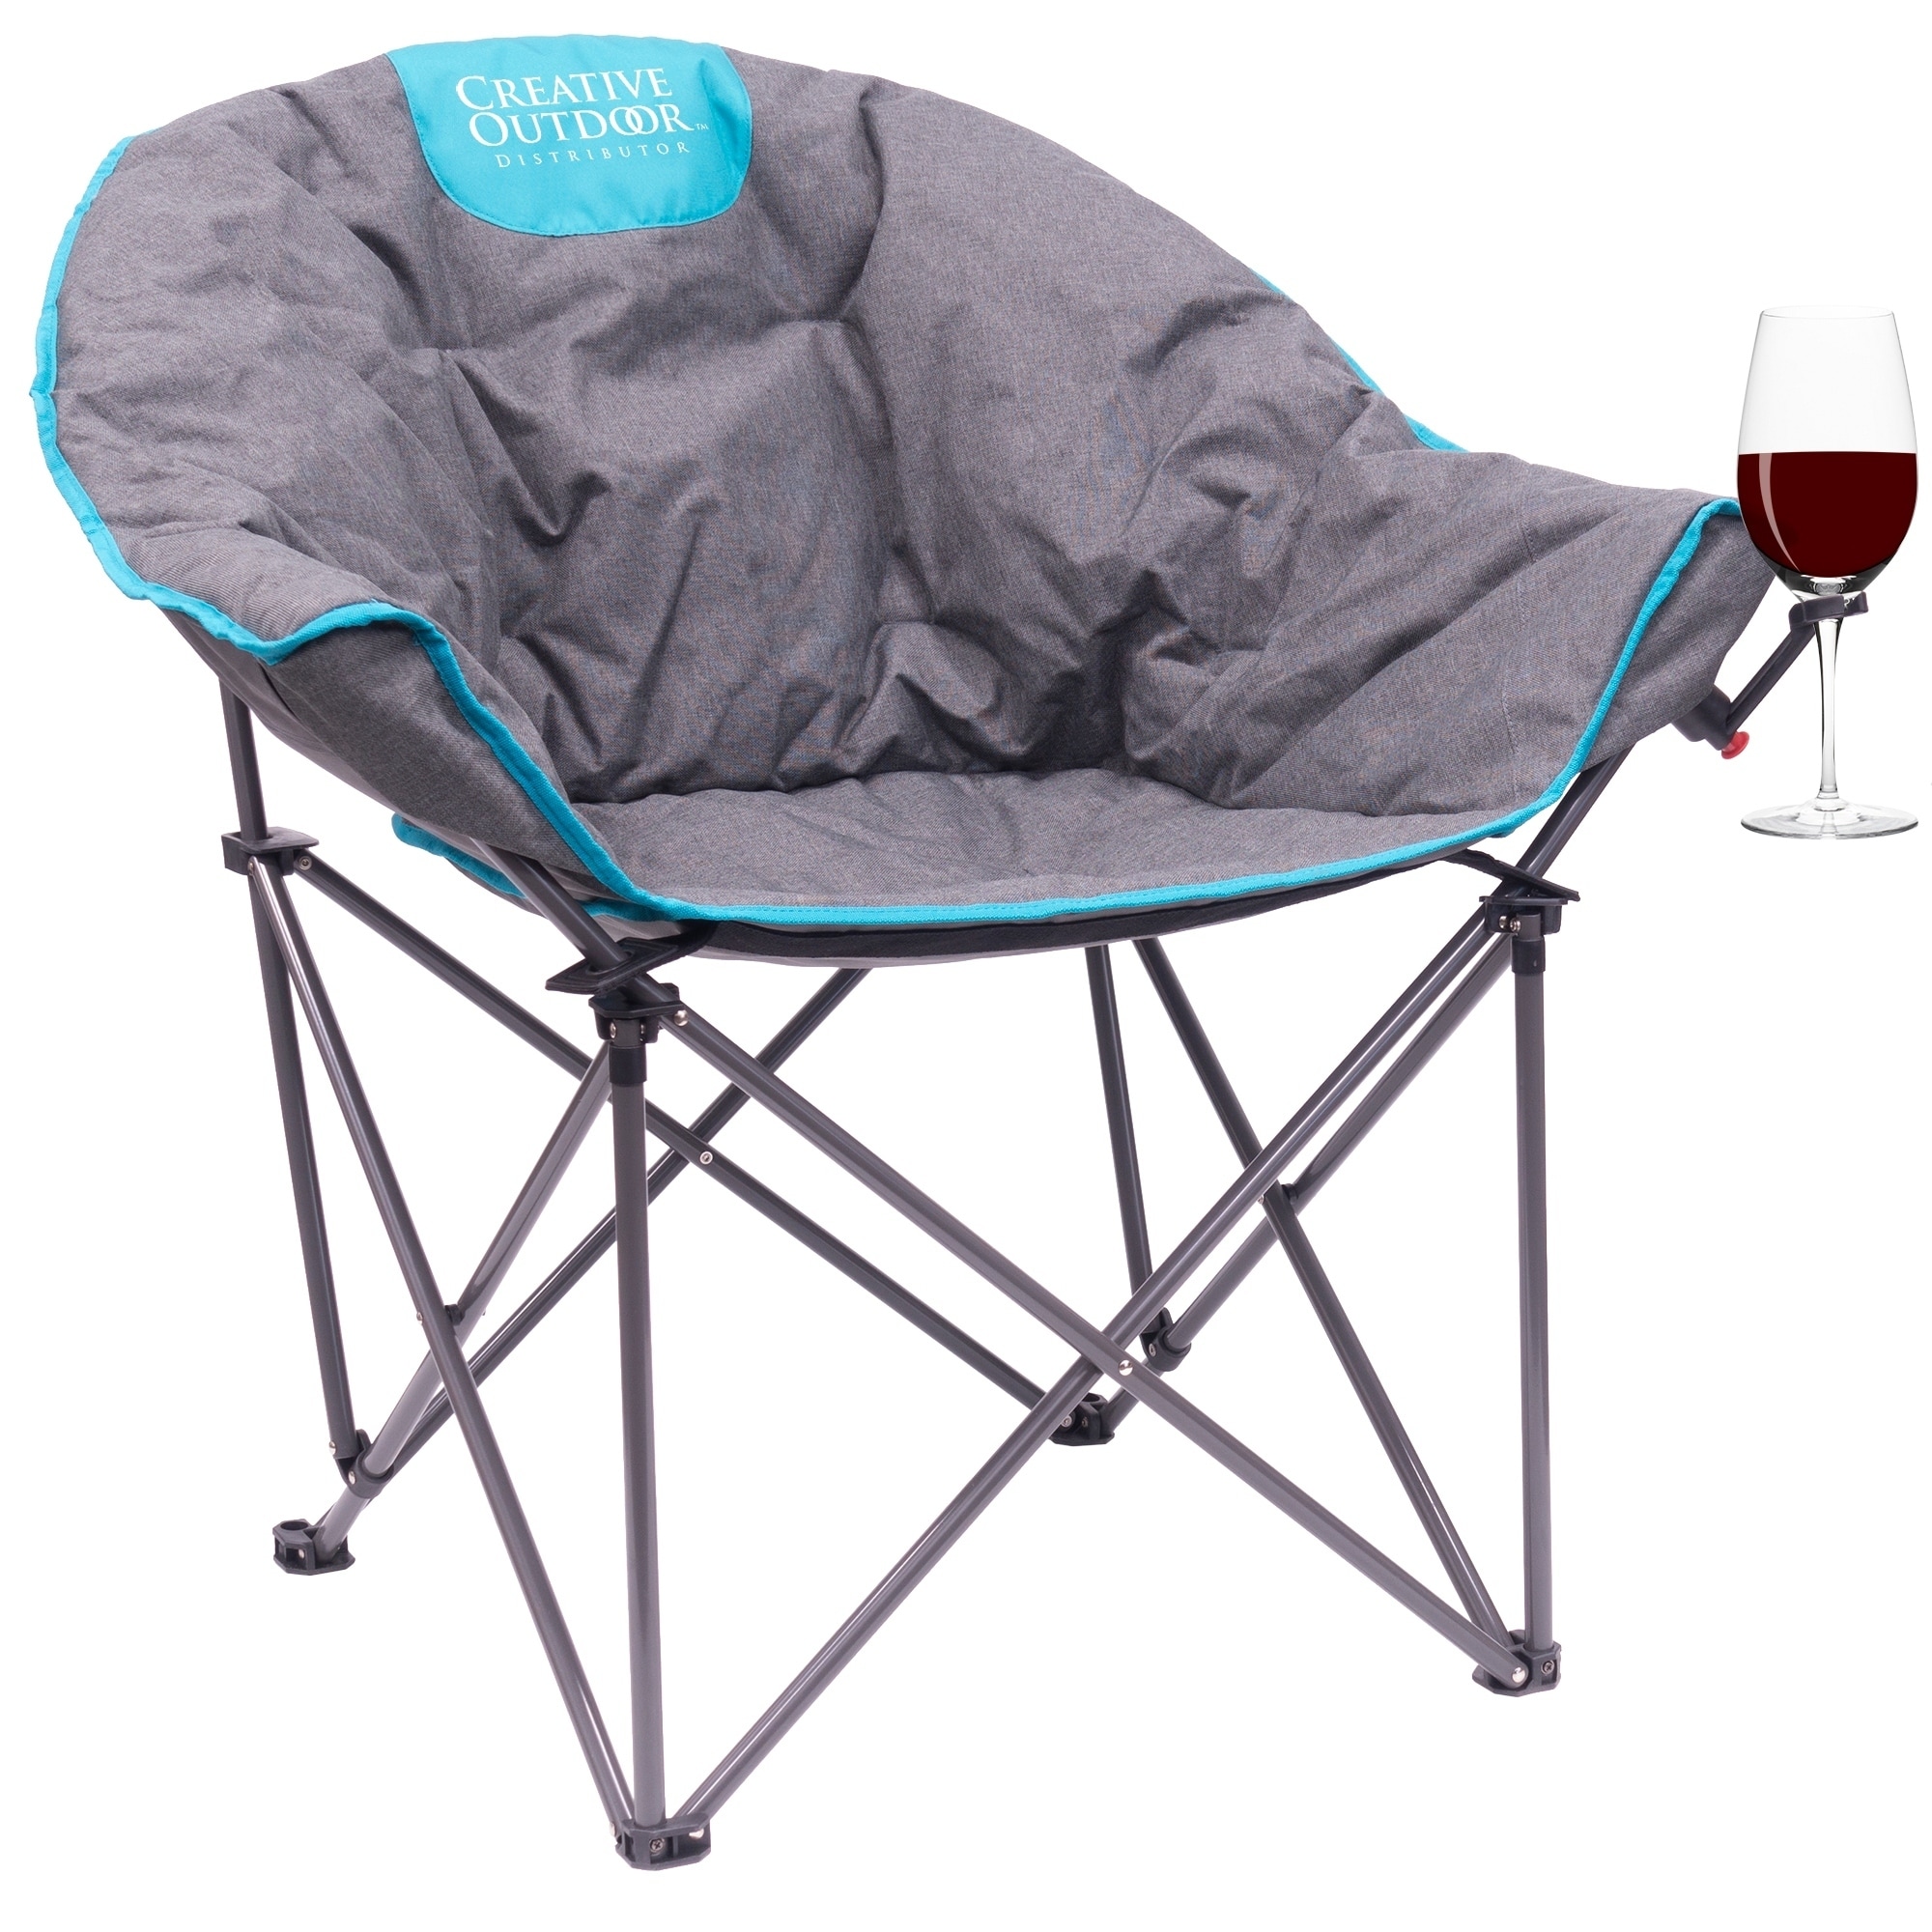 Creative Outdoor Folding Bucket Wine Chair  Heavy Duty Chair With Steel Frame and Adjustable Seat For Outdoor Or Indoor- Gray/teal